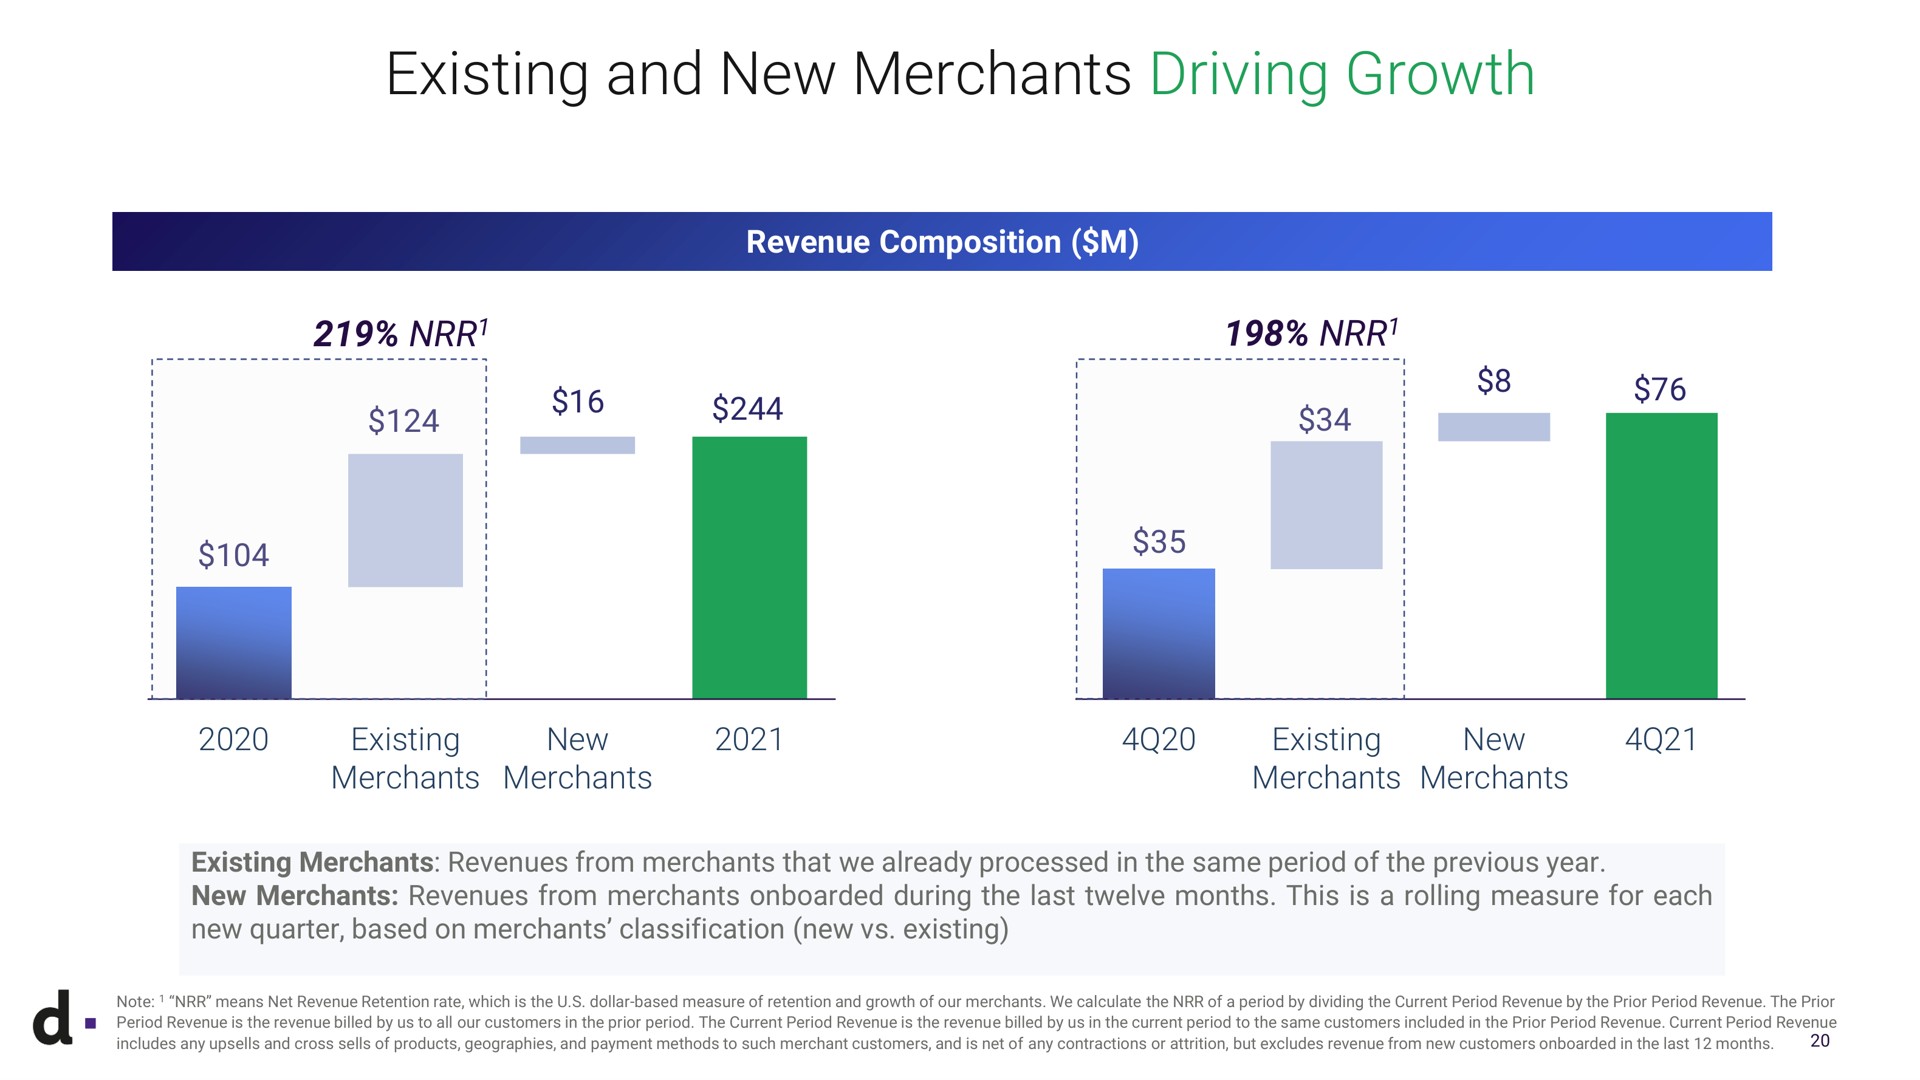 existing and new merchants driving growth revenue composition revenues from that we already processed in the same period of the previous year revenues from during the last twelve months this is quarter based on classification a rolling measure for each note means net revenue retention rate which is the dollar based measure of retention of our we calculate the of a period by dividing the current period revenue by the prior period revenue the prior period revenue is the revenue billed by us to all our customers in the prior period the current period revenue is the revenue billed by us in the current period to the same customers included in the prior period revenue current period revenue includes any cross sells of products geographies payment methods to such merchant customers is net of any contractions or attrition but excludes revenue from customers in the last months | dLocal